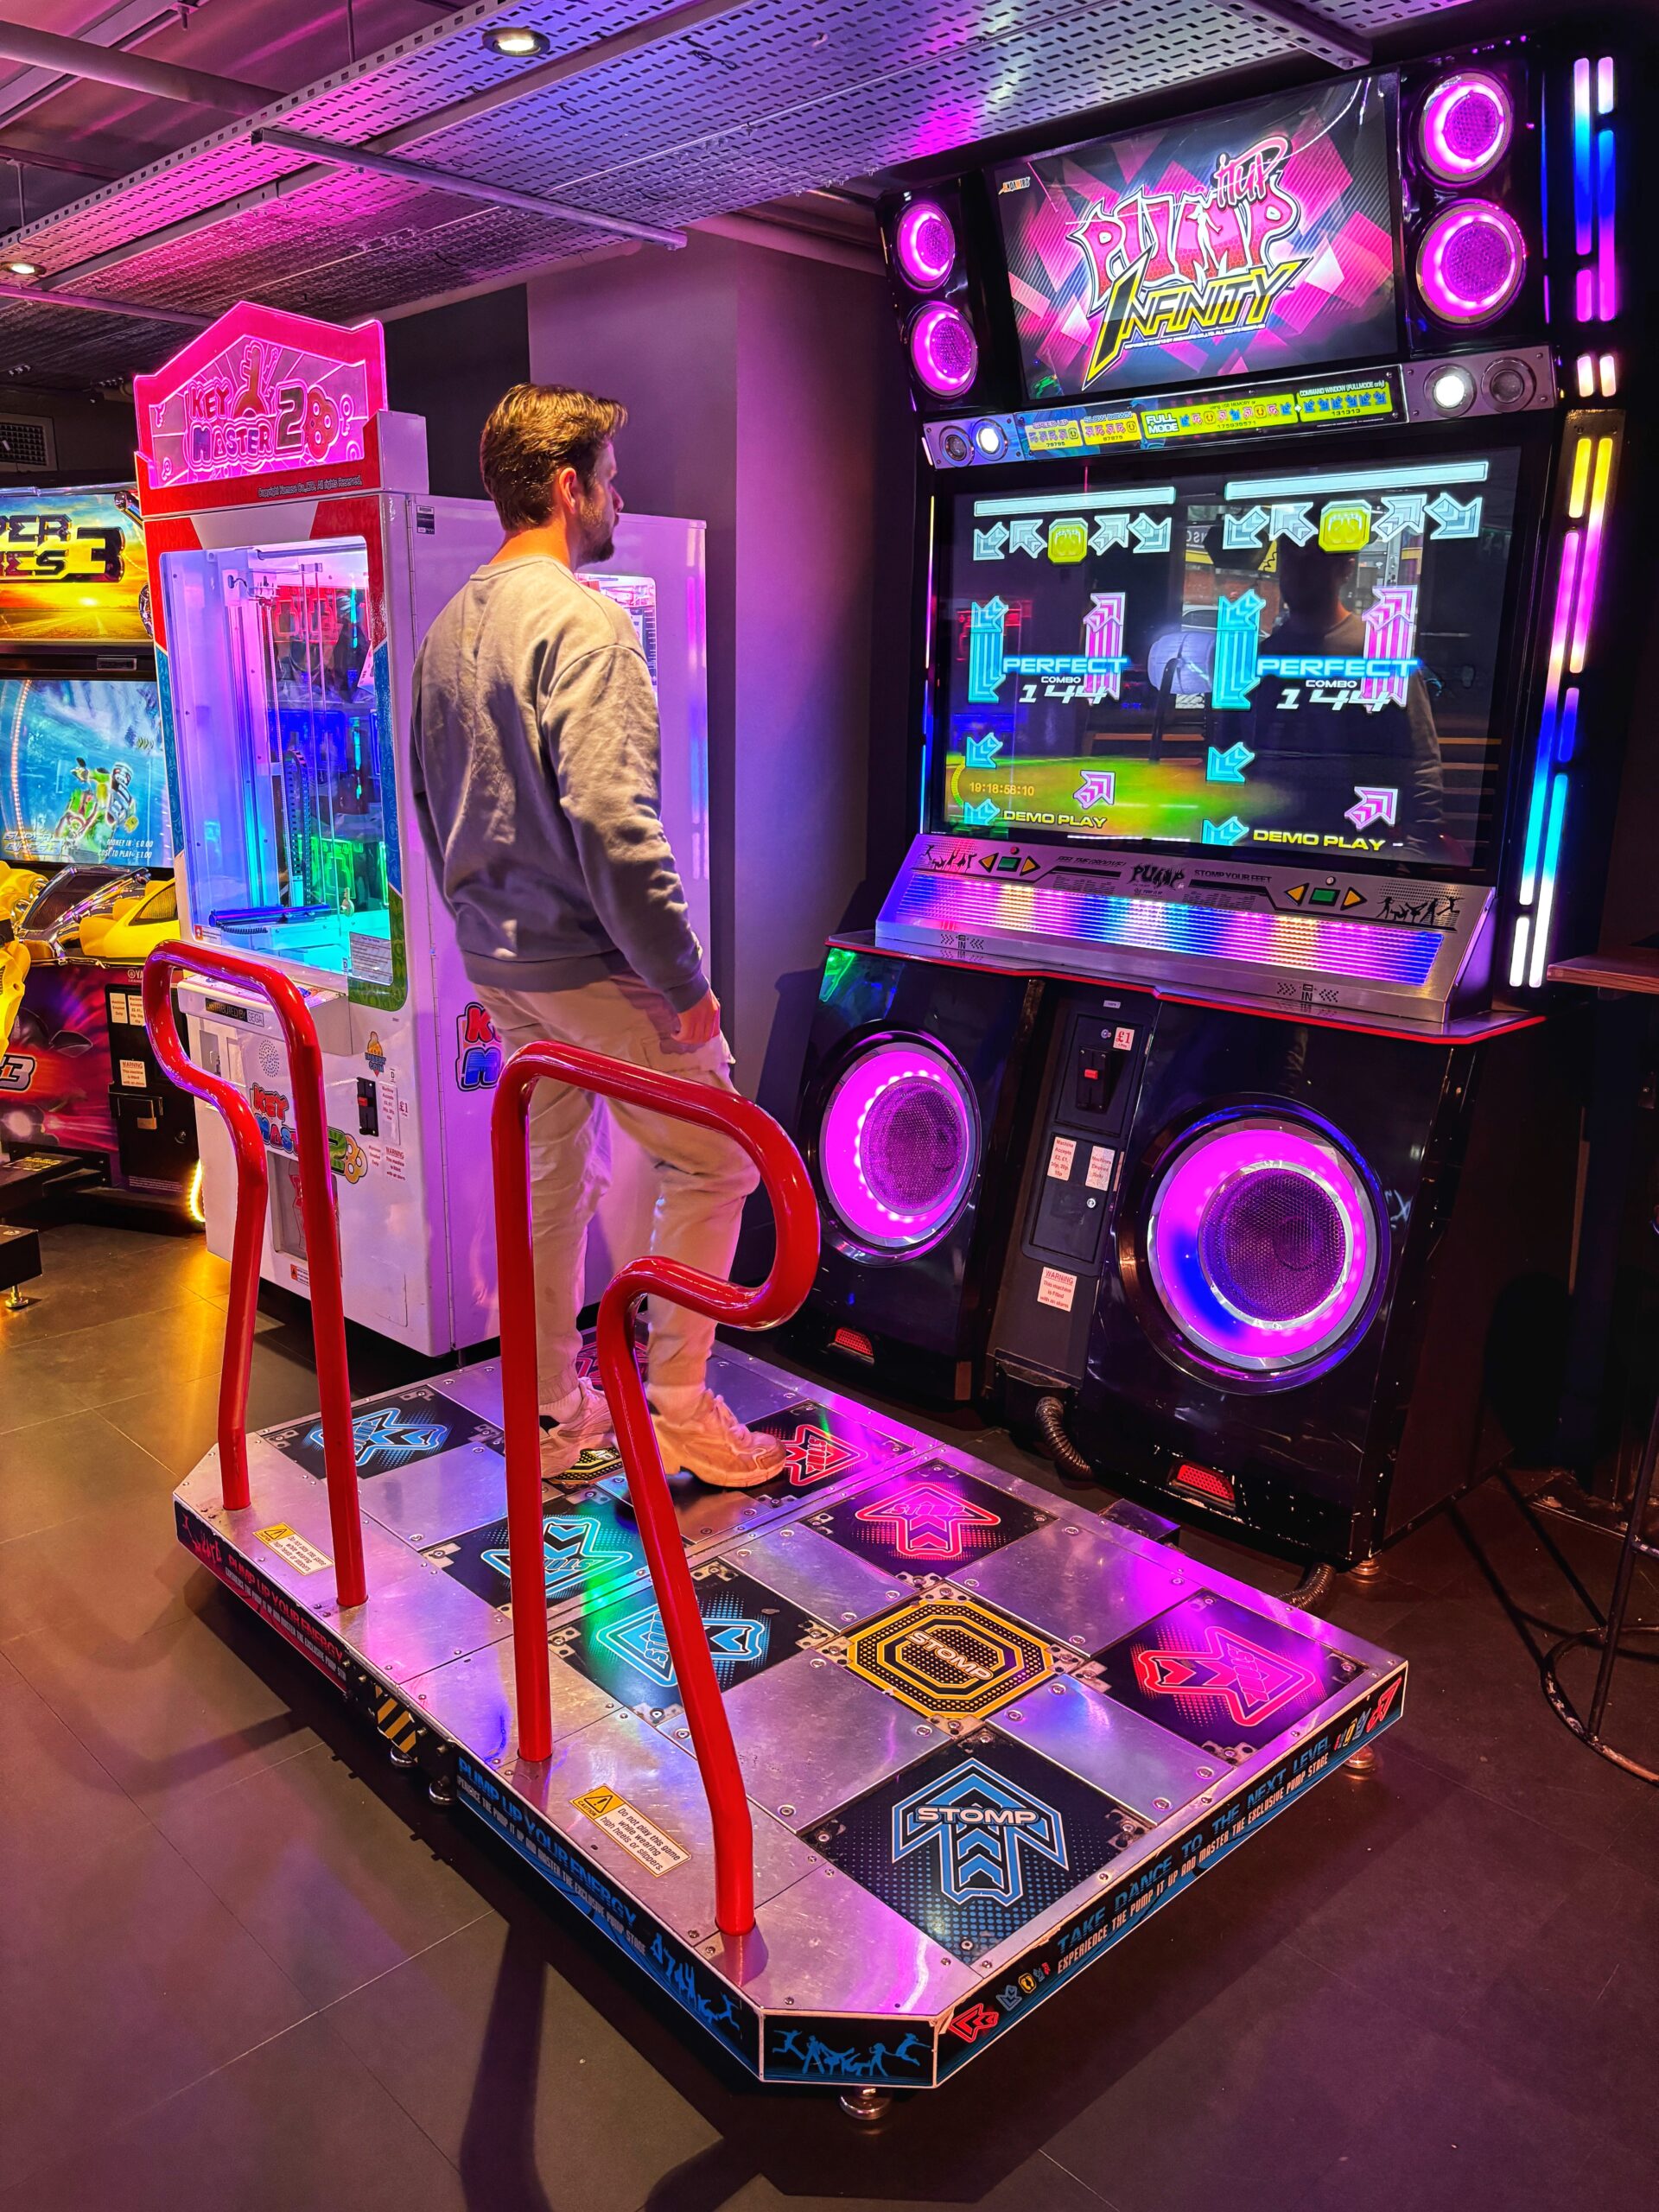 There are loads of arcade games to play at Tenpin Manchester Printworks